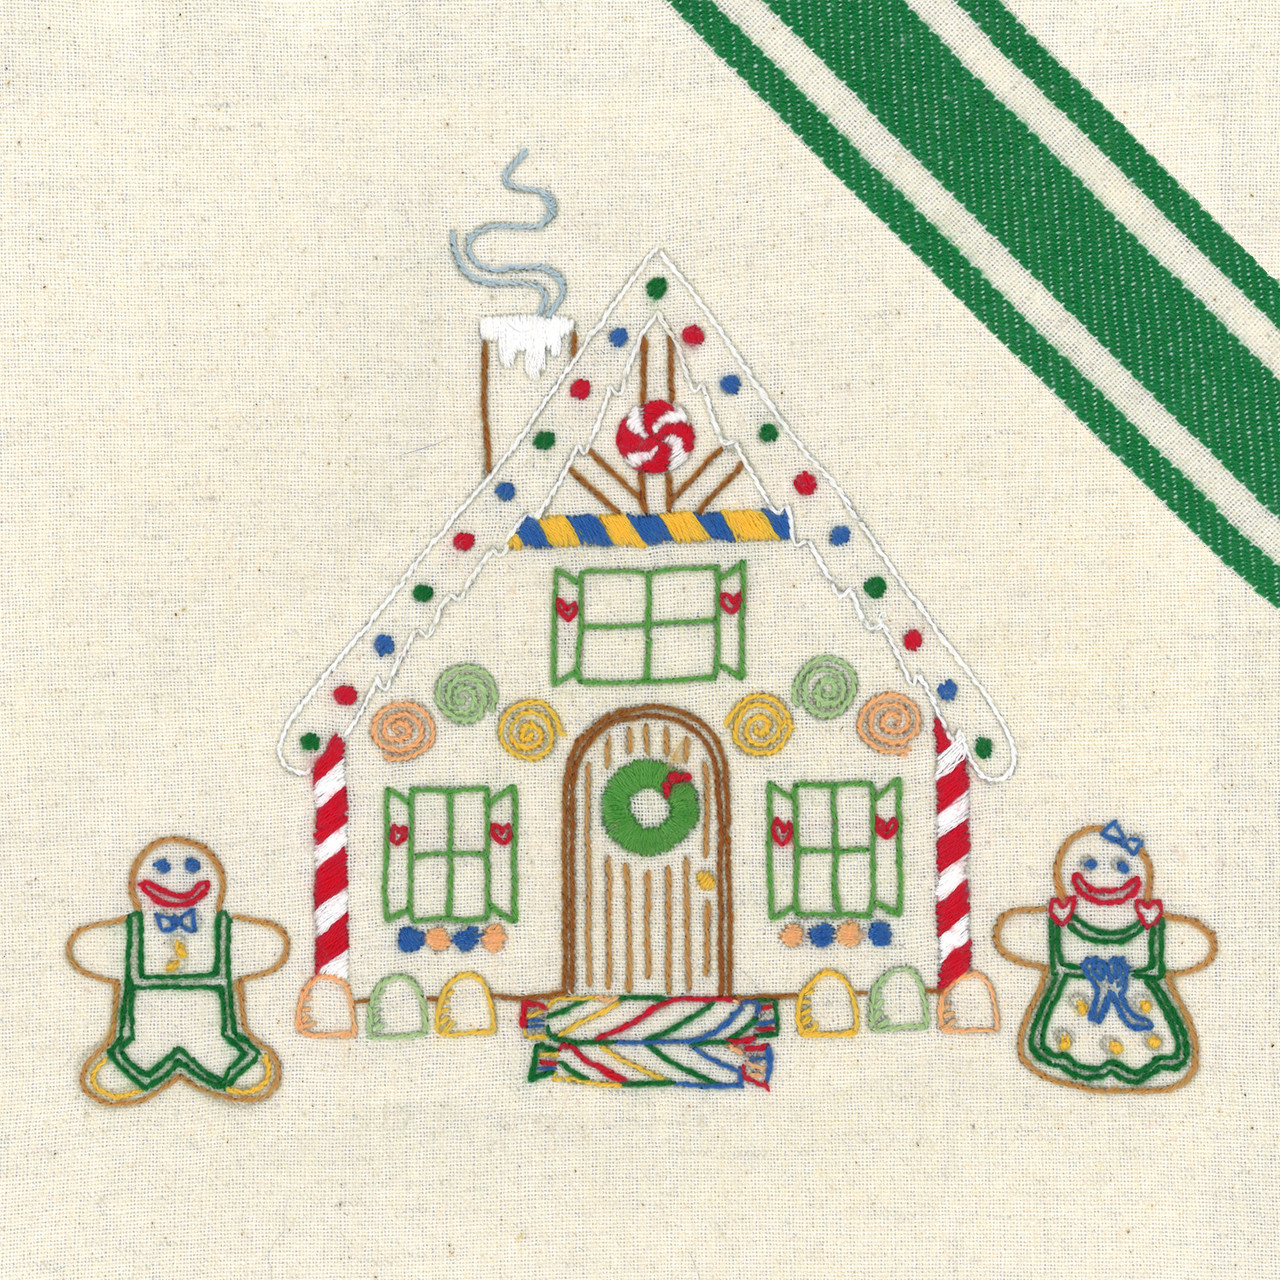 Christmas Bliss - Hand Stitch Embroidery Transfer Pattern